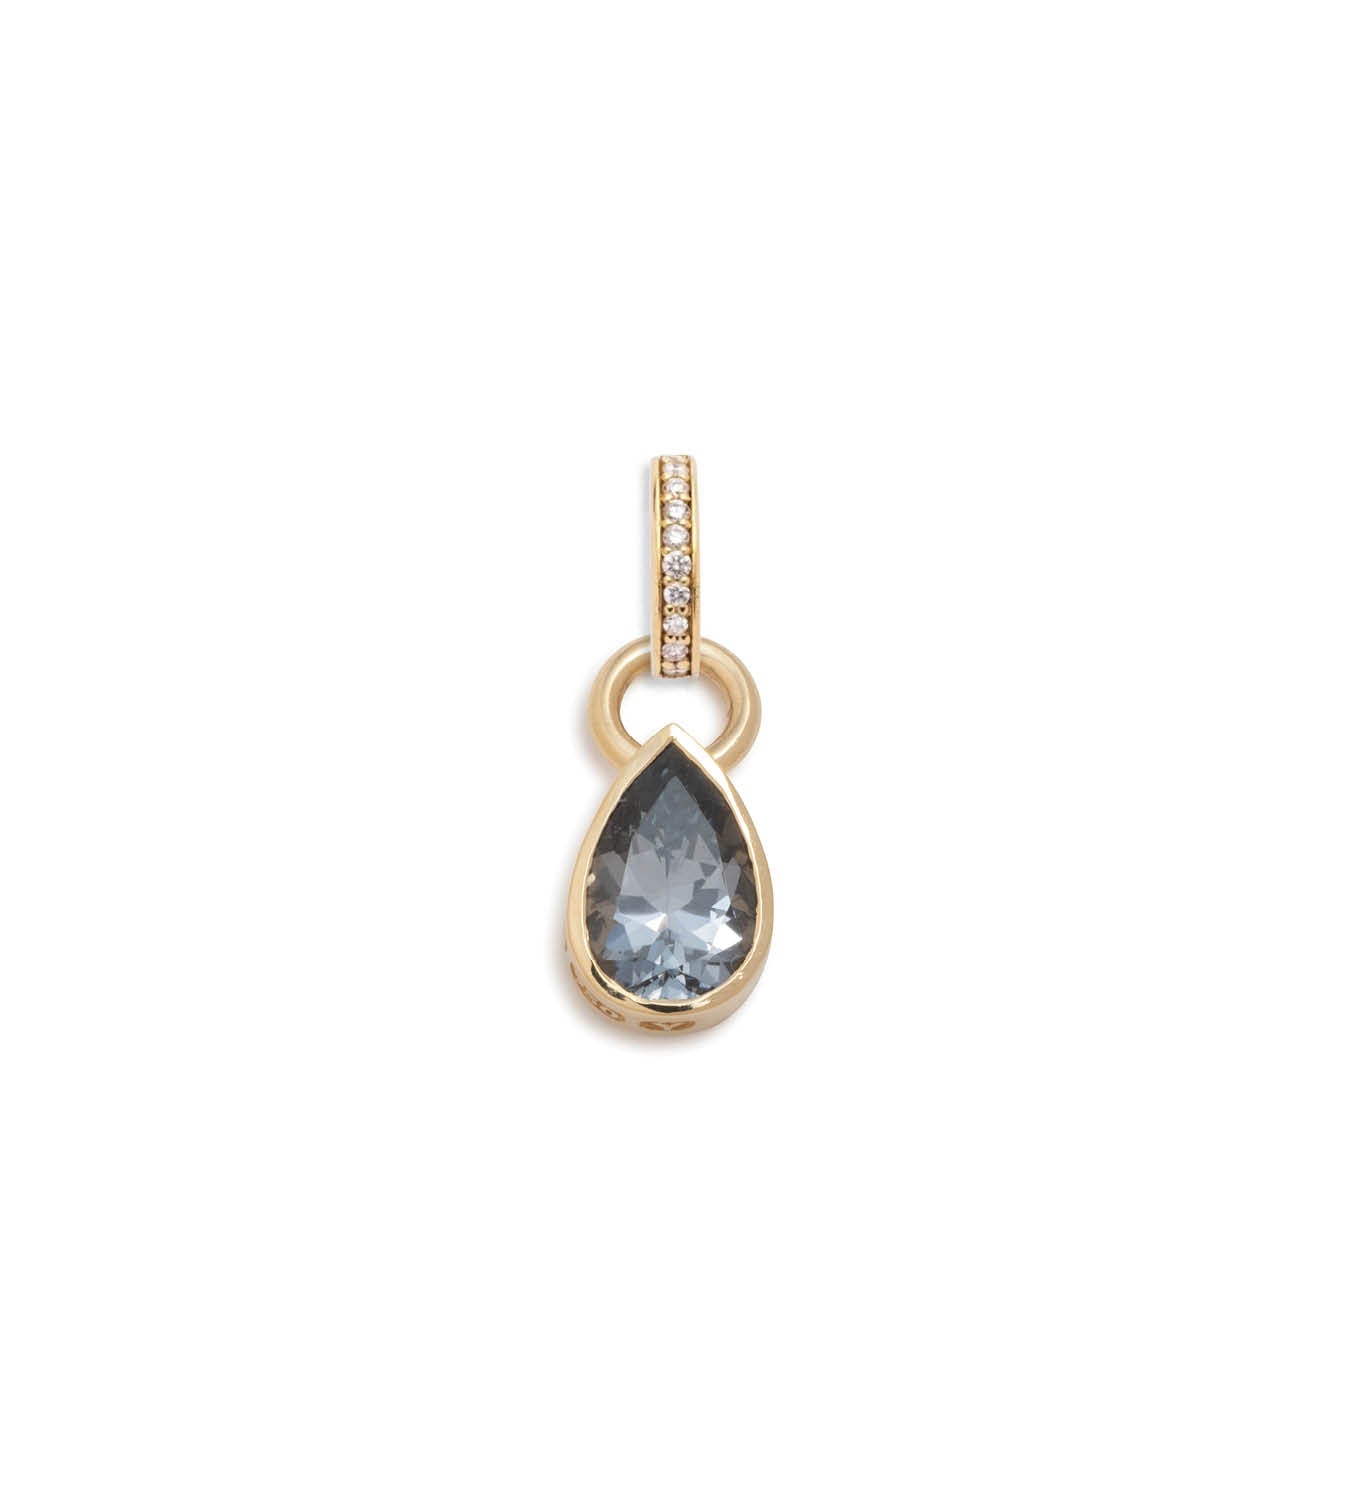 Forever & Always a Pair - Love : 1.9ct Grey Spinel Pear Pendant with Oval Pushgate